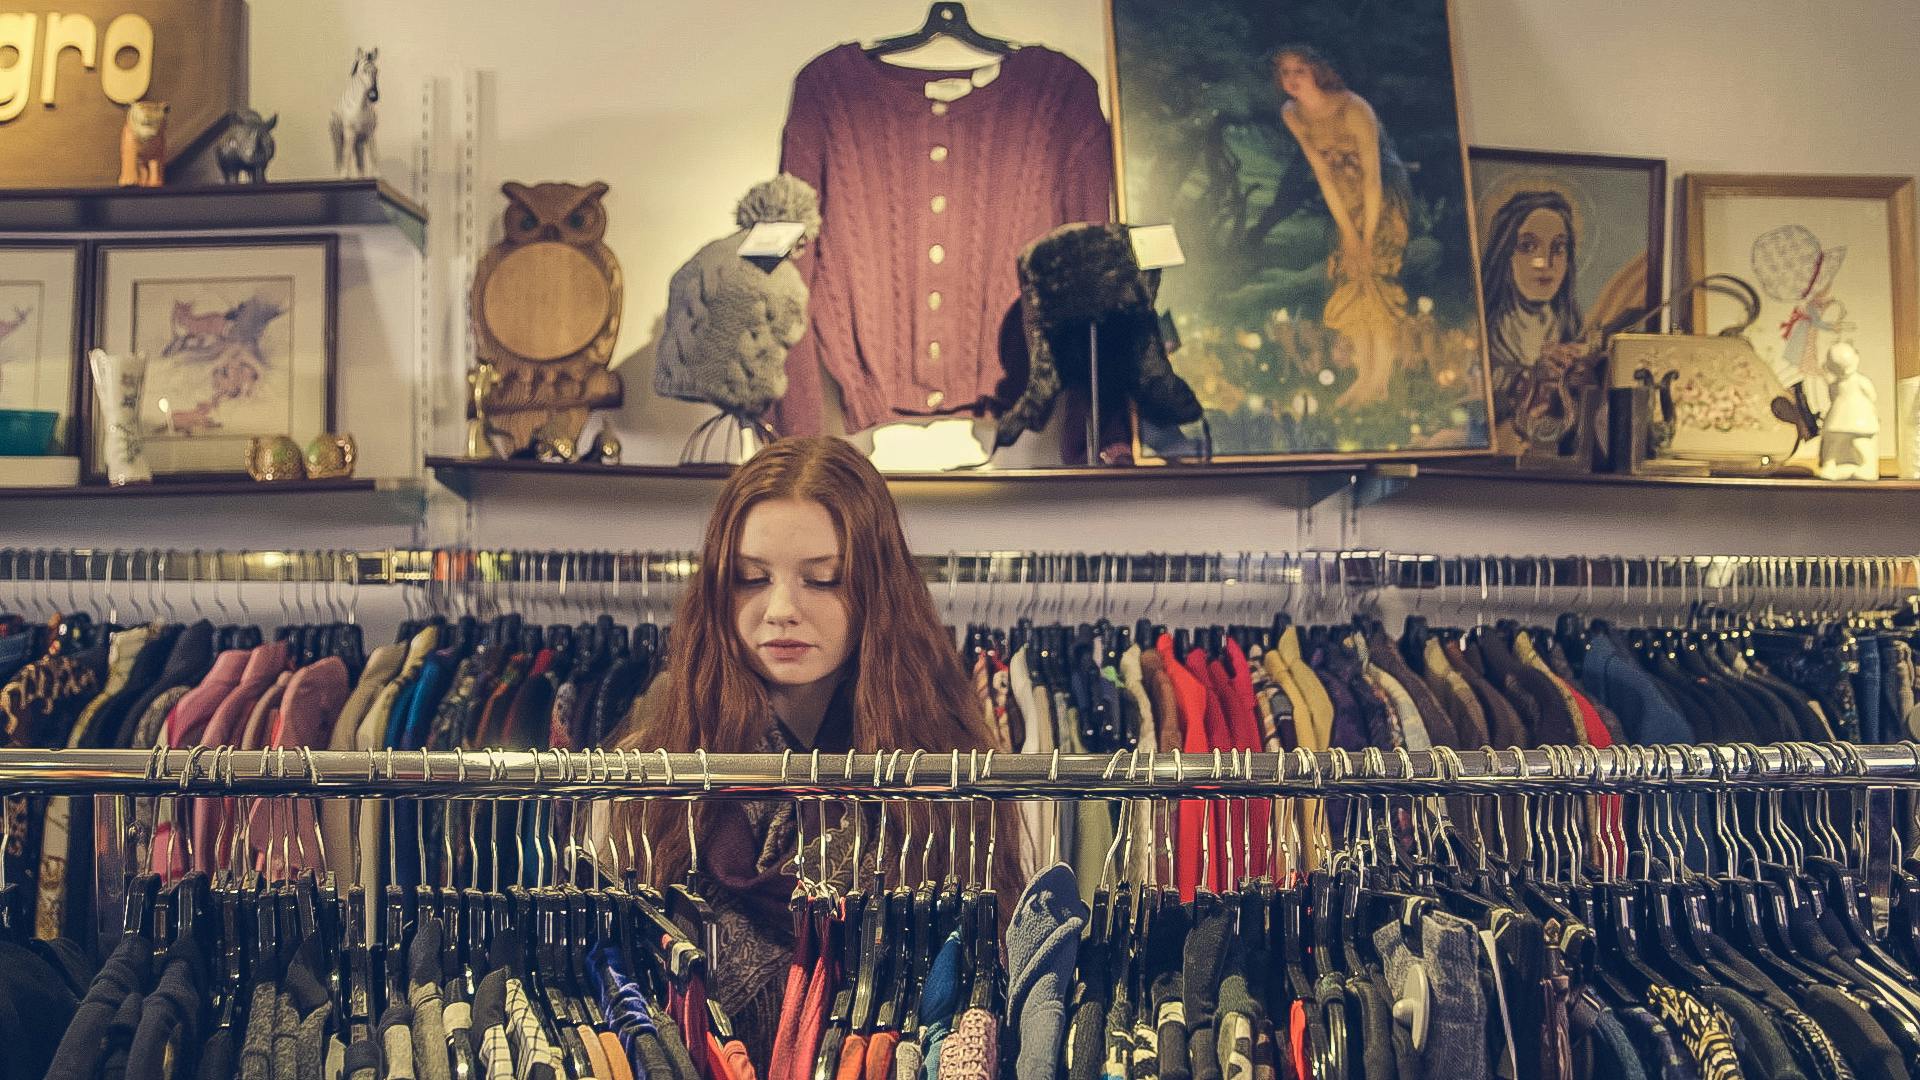 A young woman in a thrift store | Source: Pexels